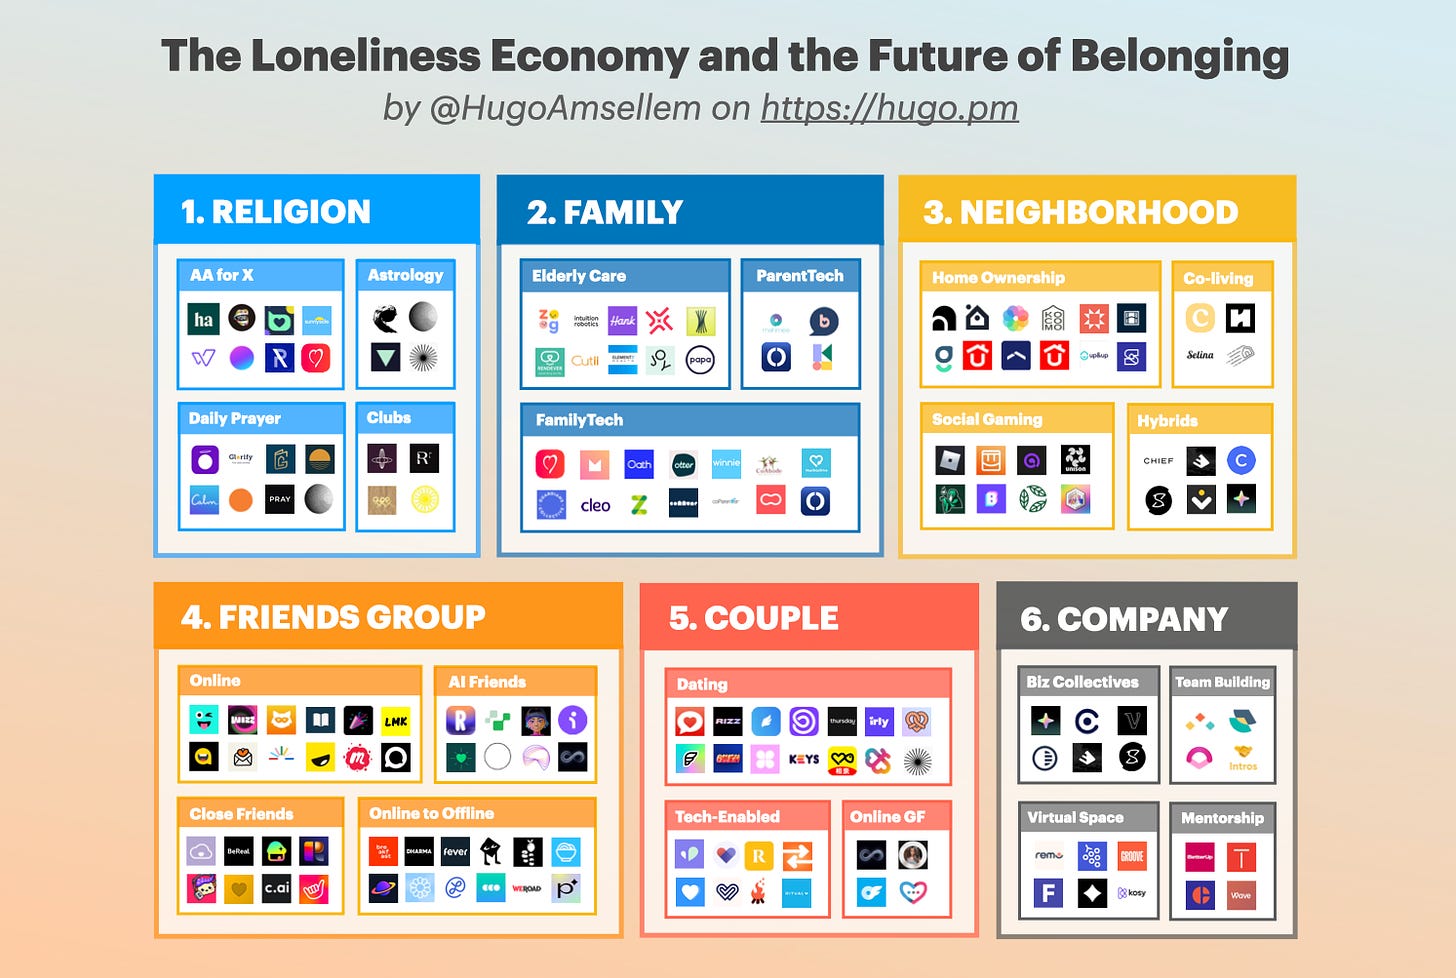 The Loneliness Economy: How can technology help us belong?